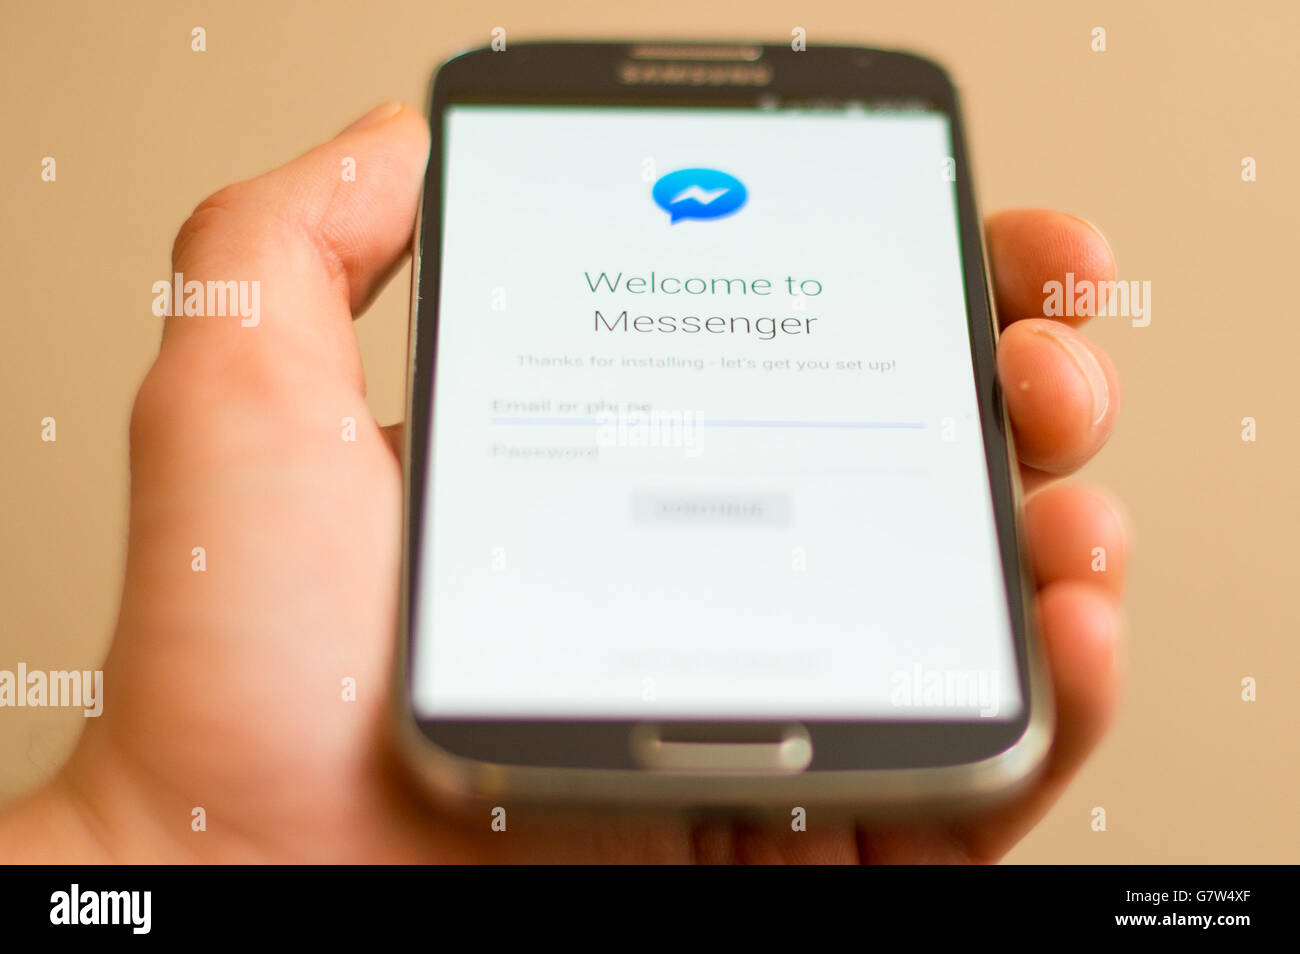 The Login Screen Of Facebook Messenger Displayed On The Screen Of A Smartphone As Facebook Believes The Updates It Has Made To Its Messenger Service Could Help Spark The Creation Of The